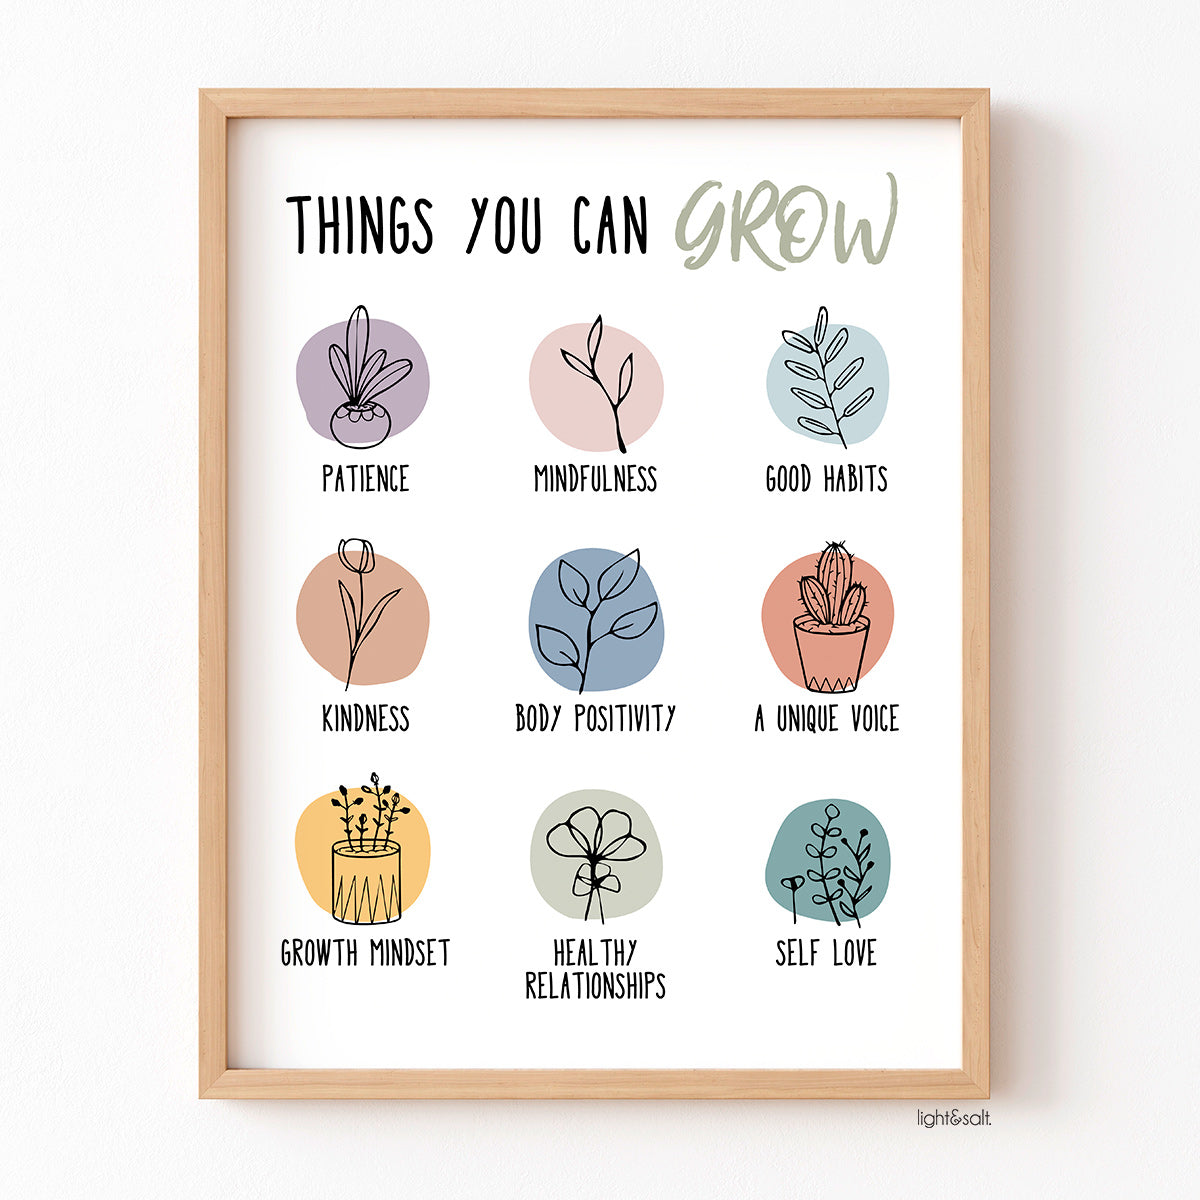 Things you can grow poster, growth mindset